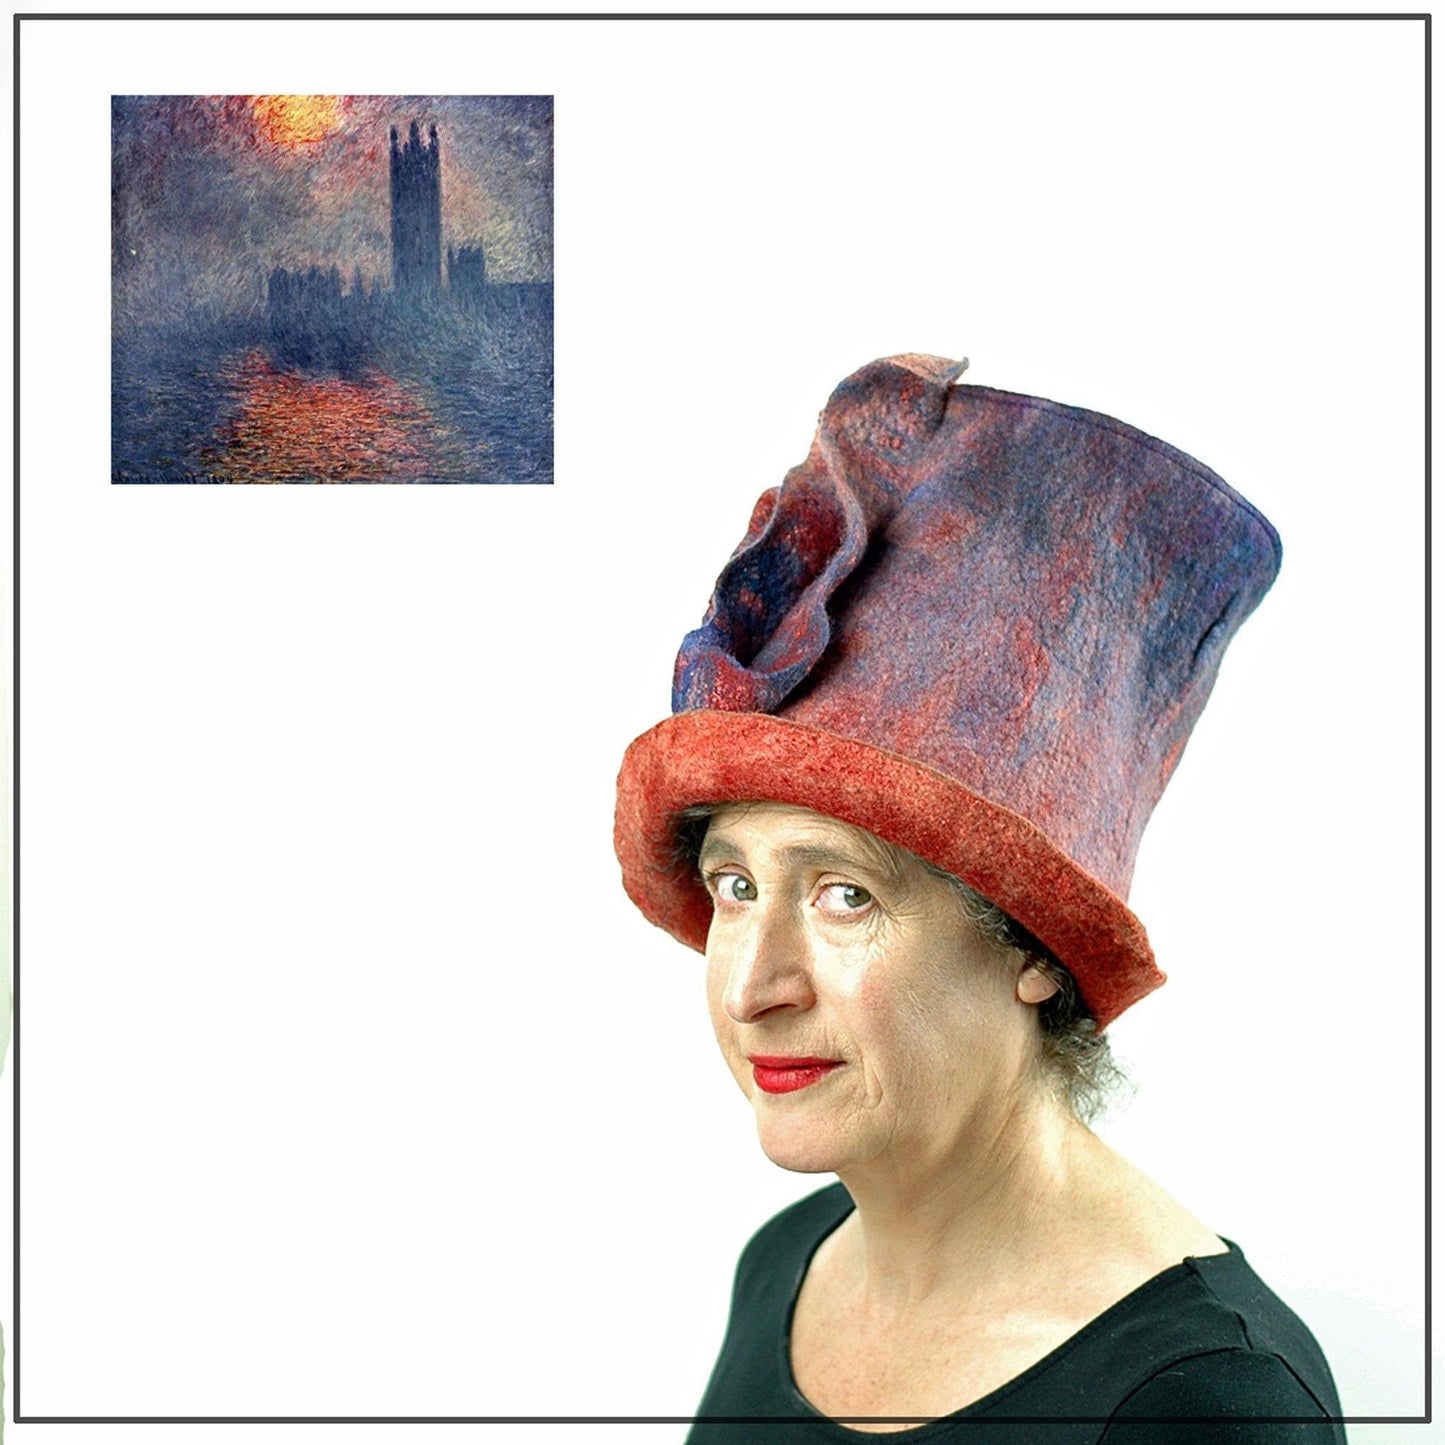 Monet's 'Houses of Parliment' and the Felted Top Hat in Purple and Orange that was inspired by it.